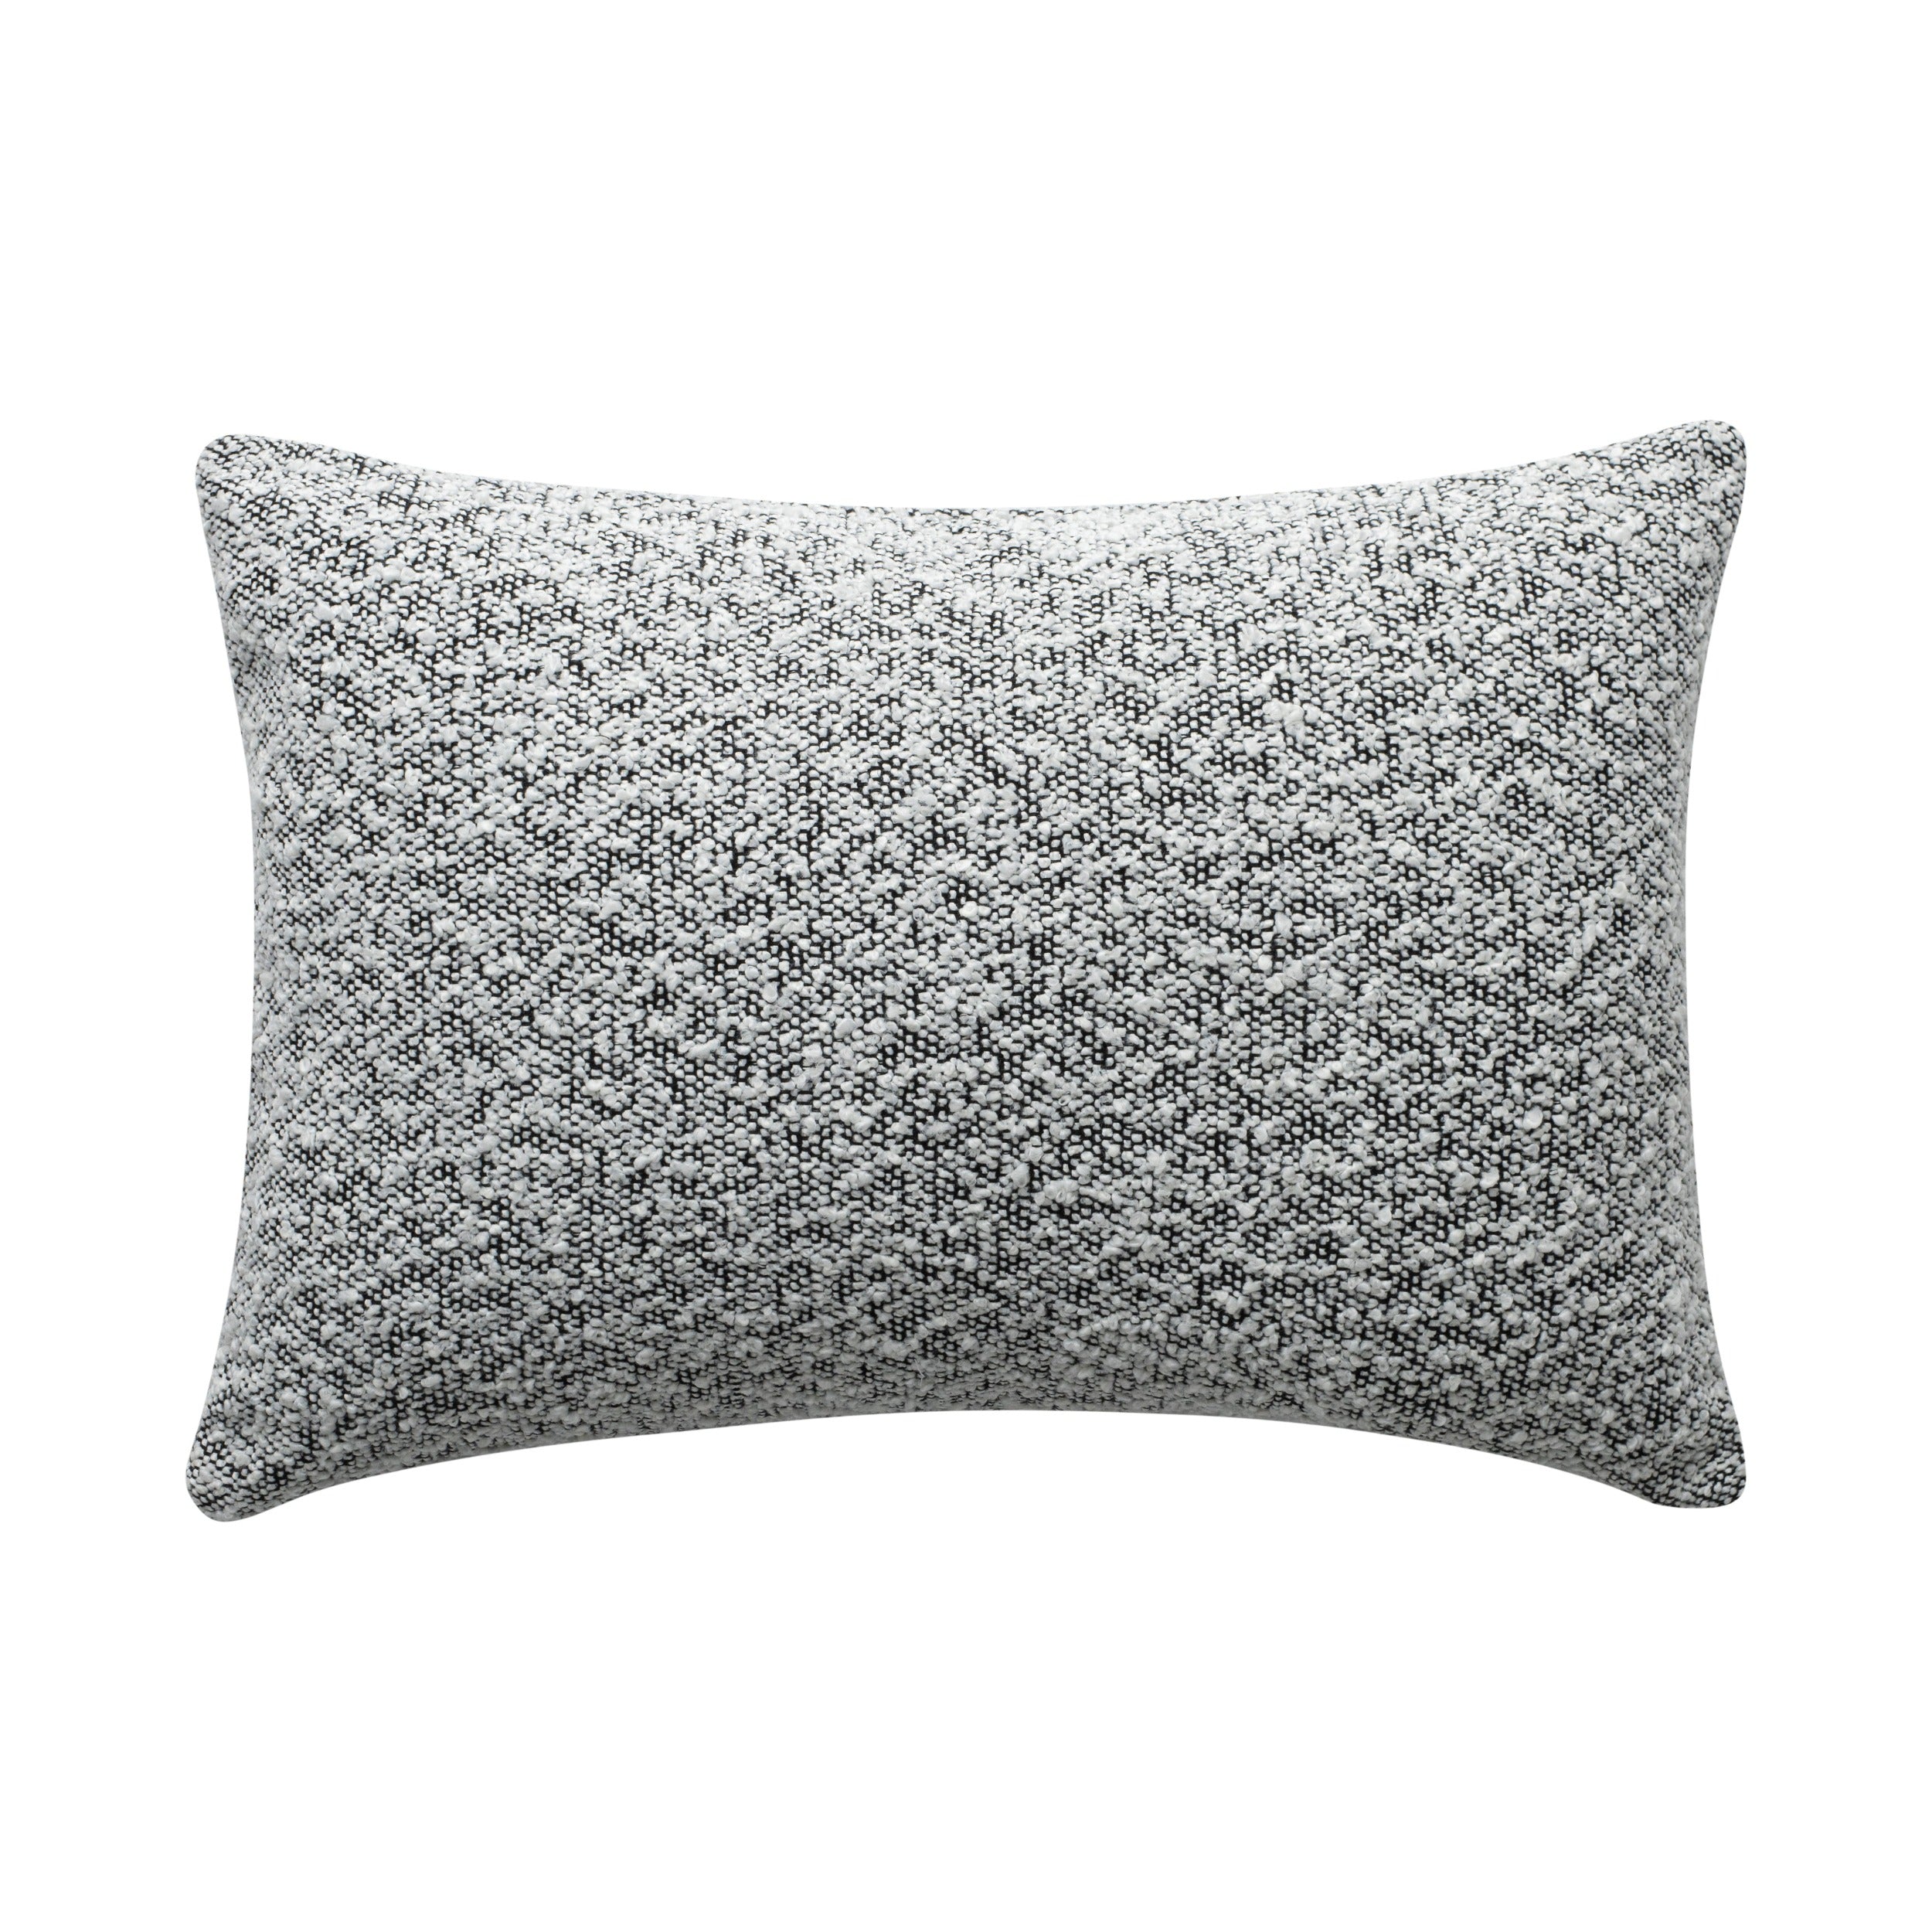 Aura Home Black and White Speckled Boucle Throw Pillow